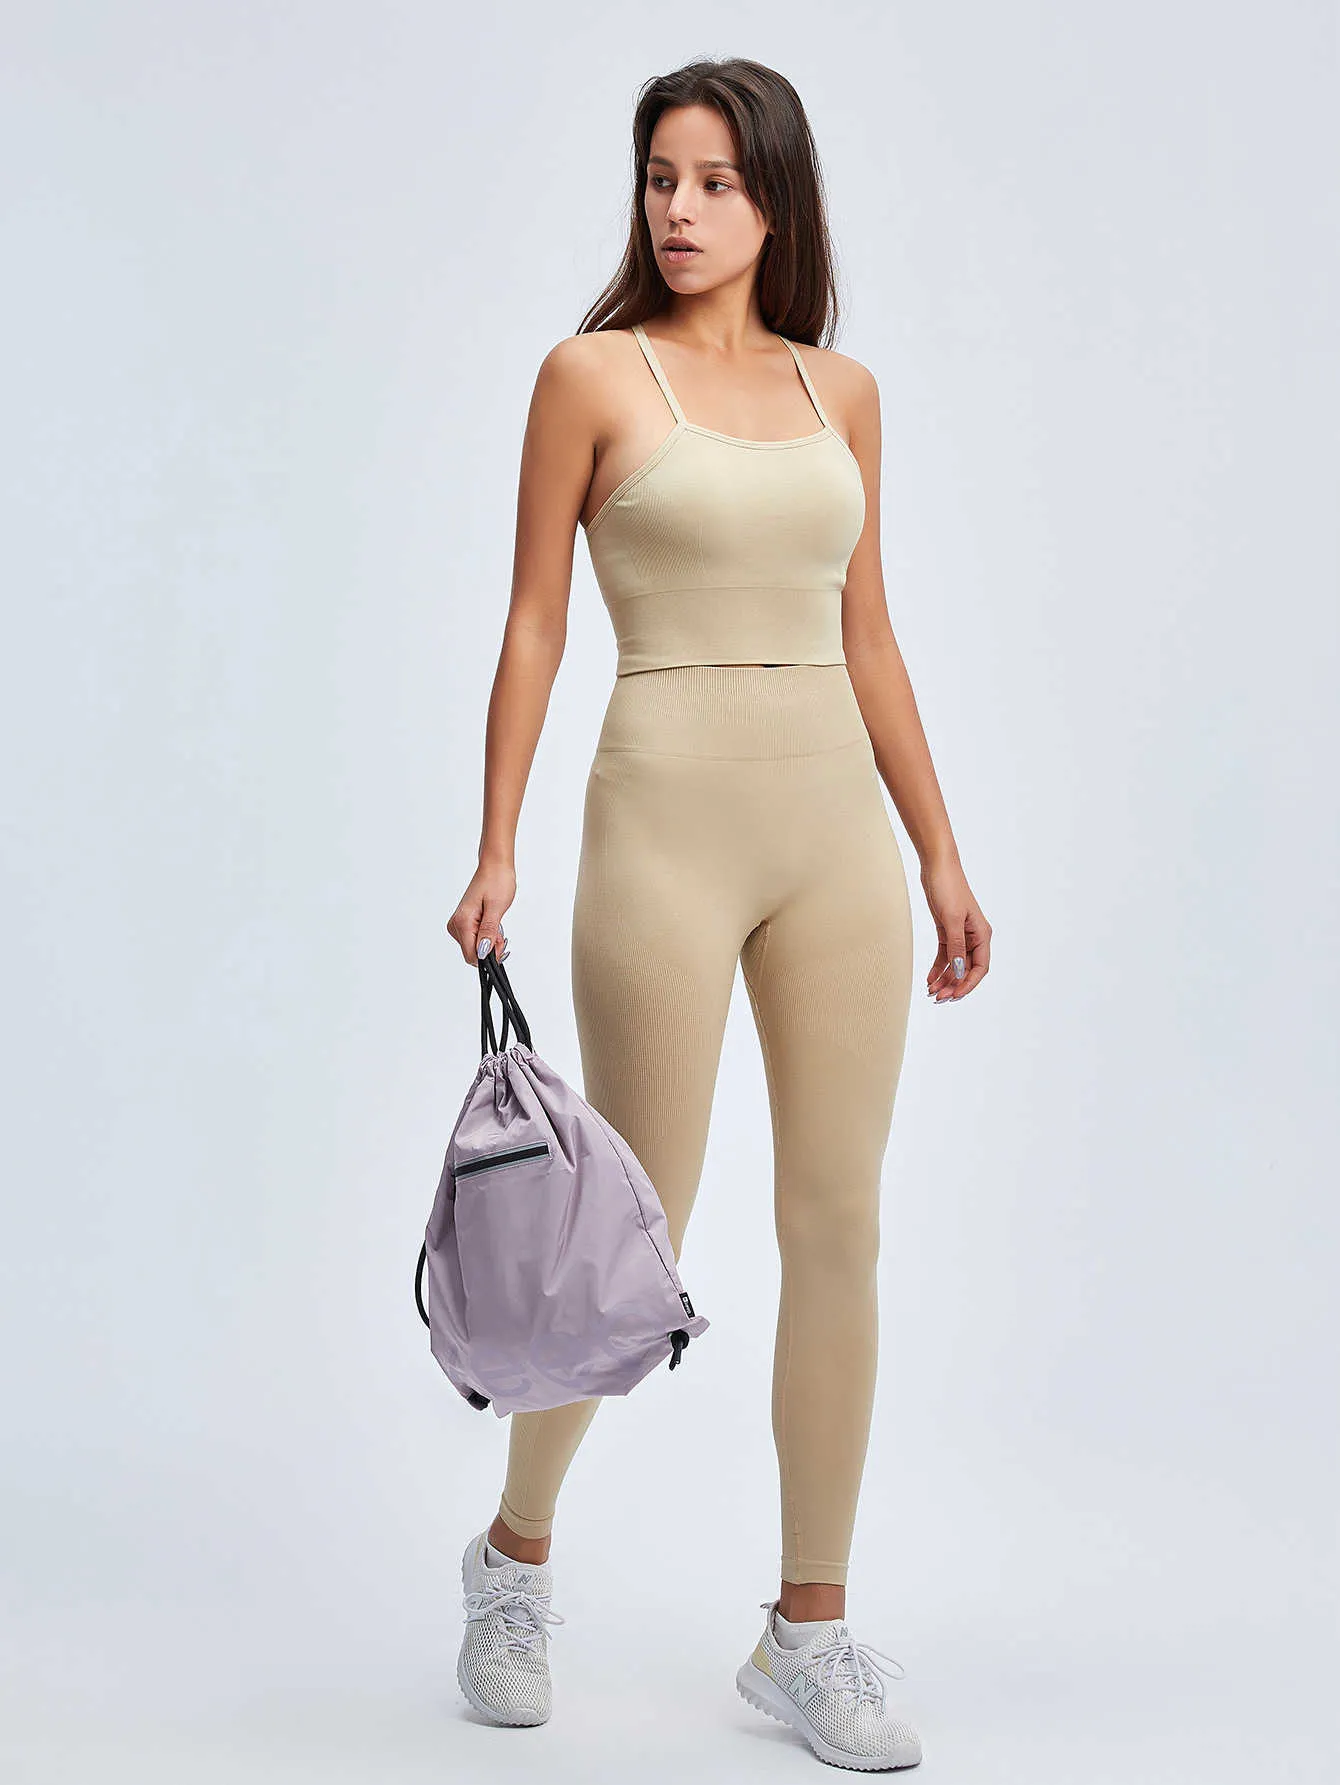 Seamless Suit for Fitness Women Sportswear Sport Outfit Long Sleeve Women's Yoga Shorts Leggings Set Gym Wear Workout Clothes 210802